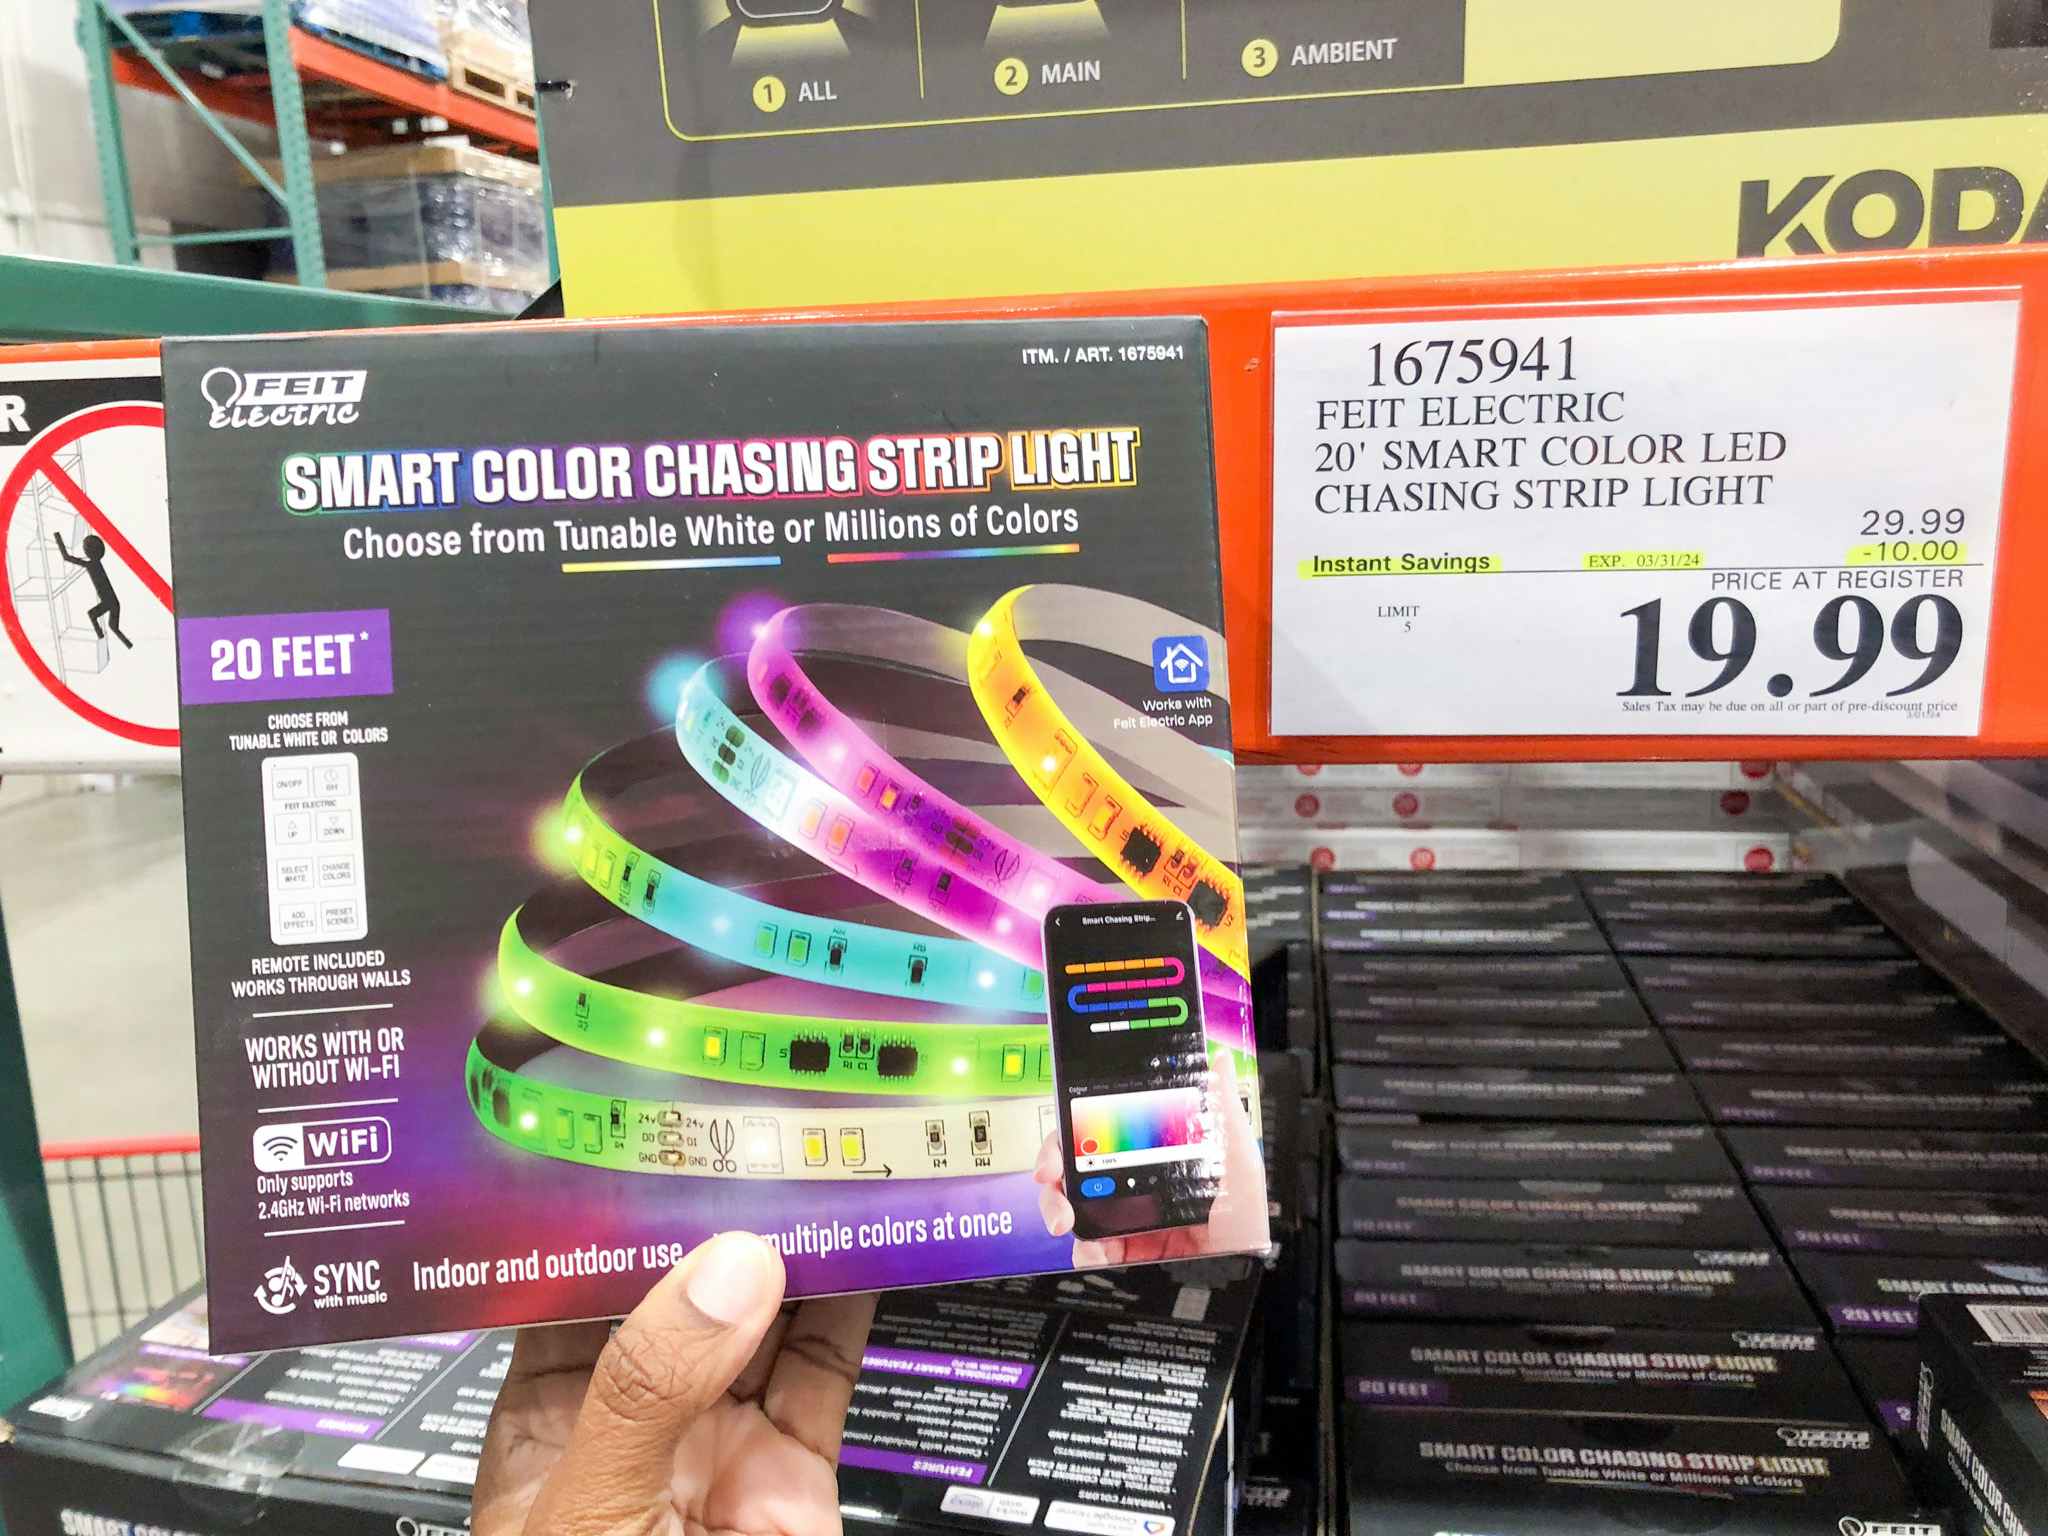 costco feit electric 20 ft smart color chasing strip light 1